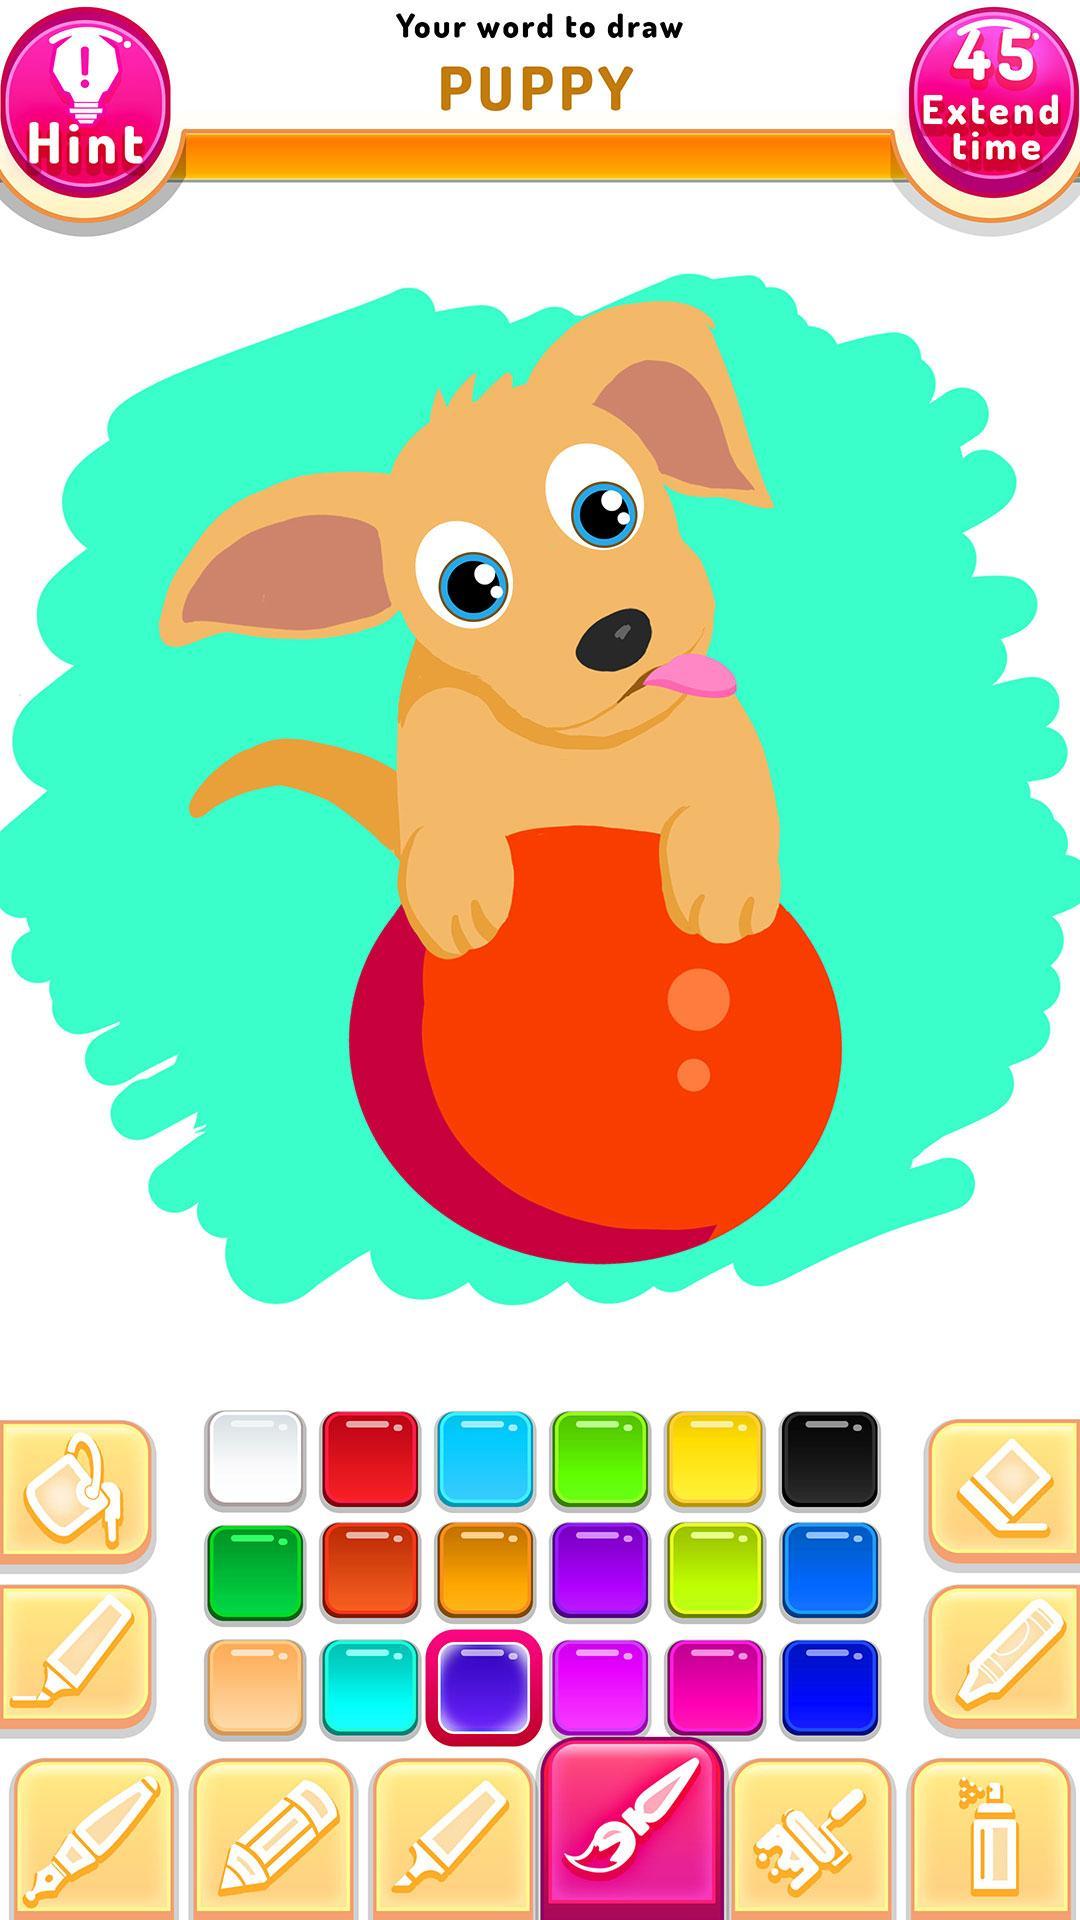 Draw N Guess 2 for Android - APK Download